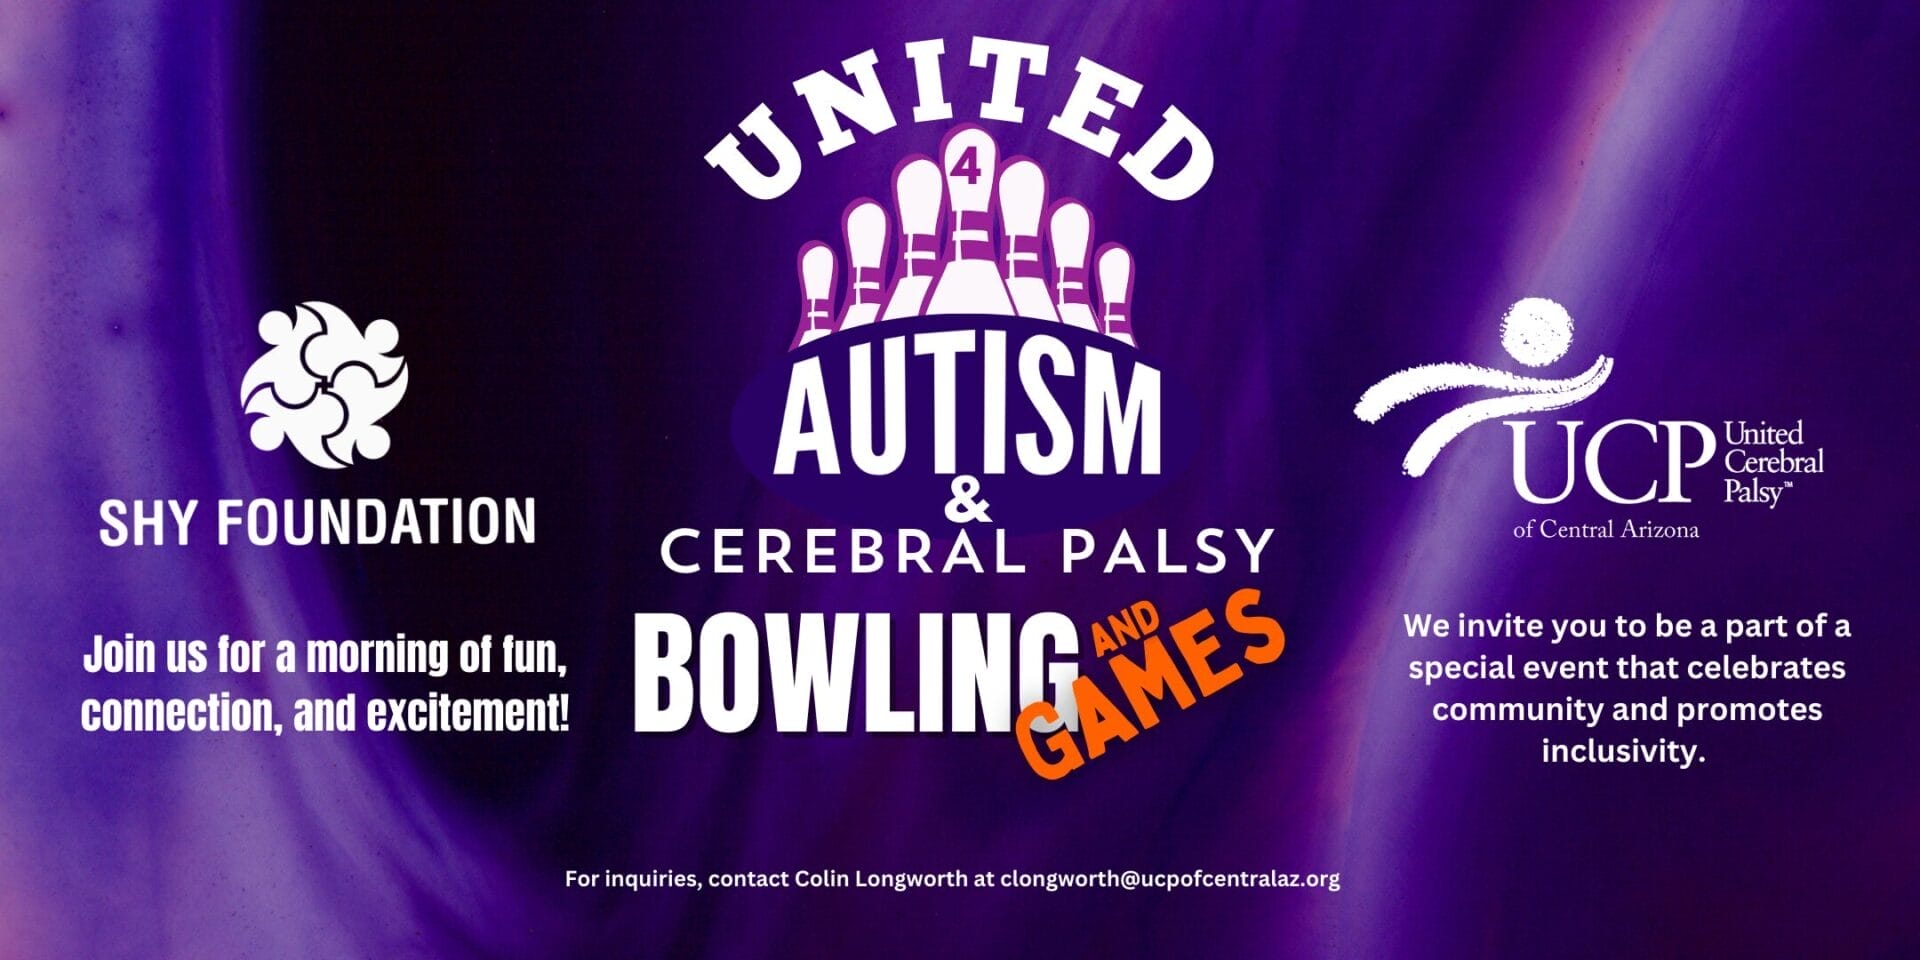 A promotional image for a bowling and games event hosted by United for Autism & Cerebral Palsy, Shy Foundation, and UCP of Central Arizona. The event promises fun, community inclusivity, and support for those with Cerebral Palsy. Contact info included.